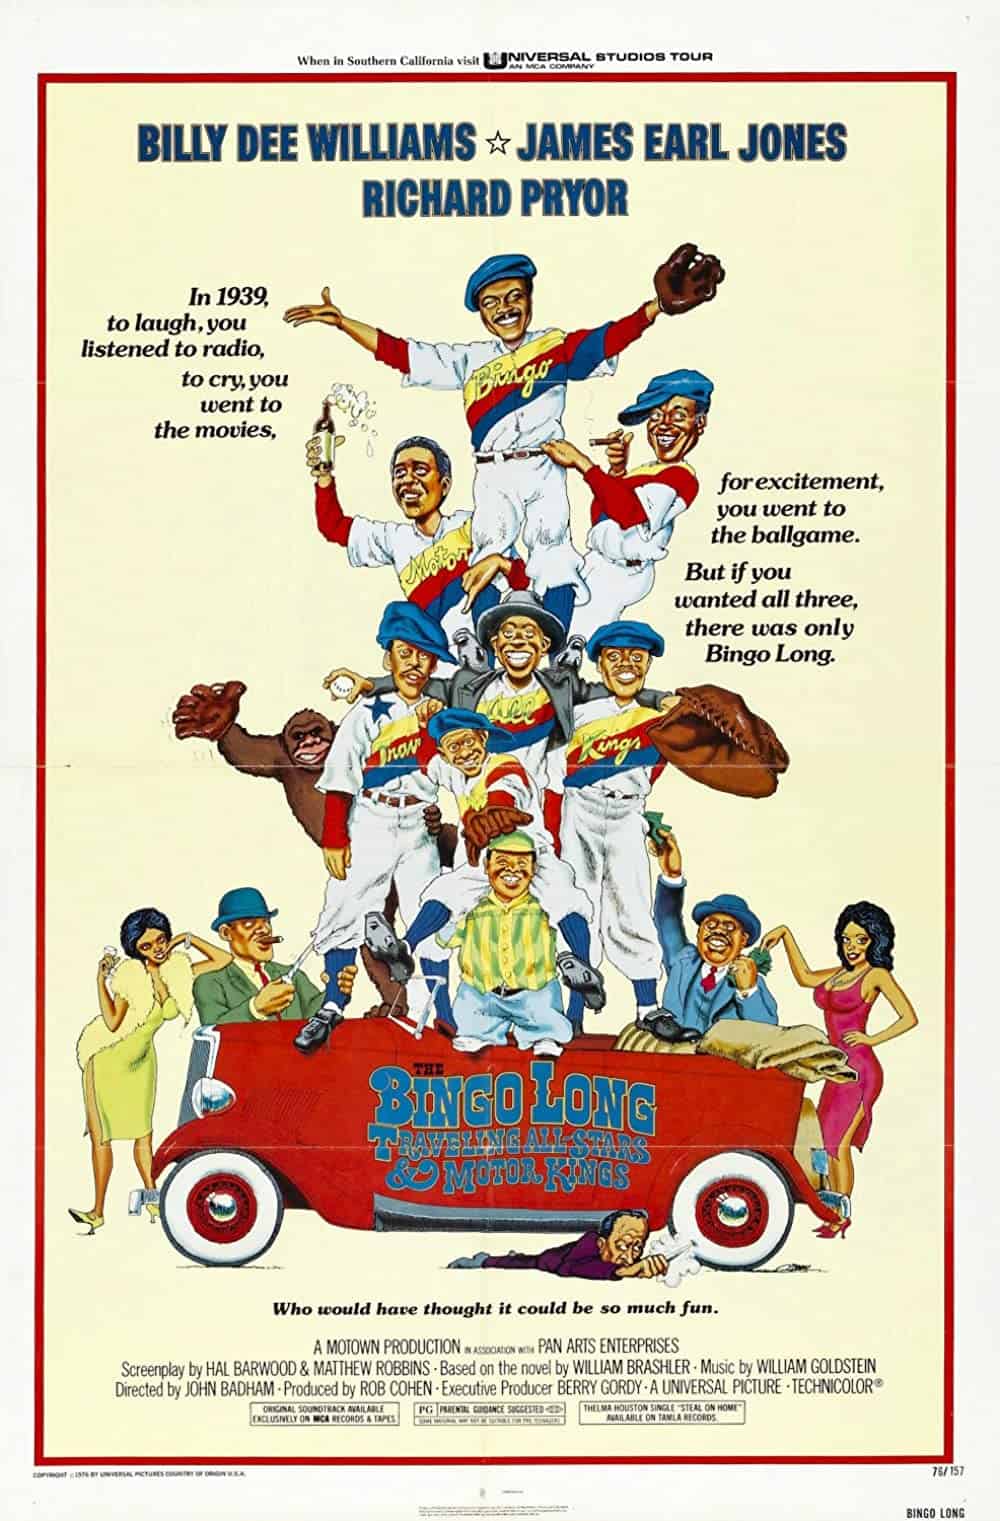 Best Baseball Movies That You Must Watch The Bingo Long Traveling All-Stars & Motor Kings (1976)